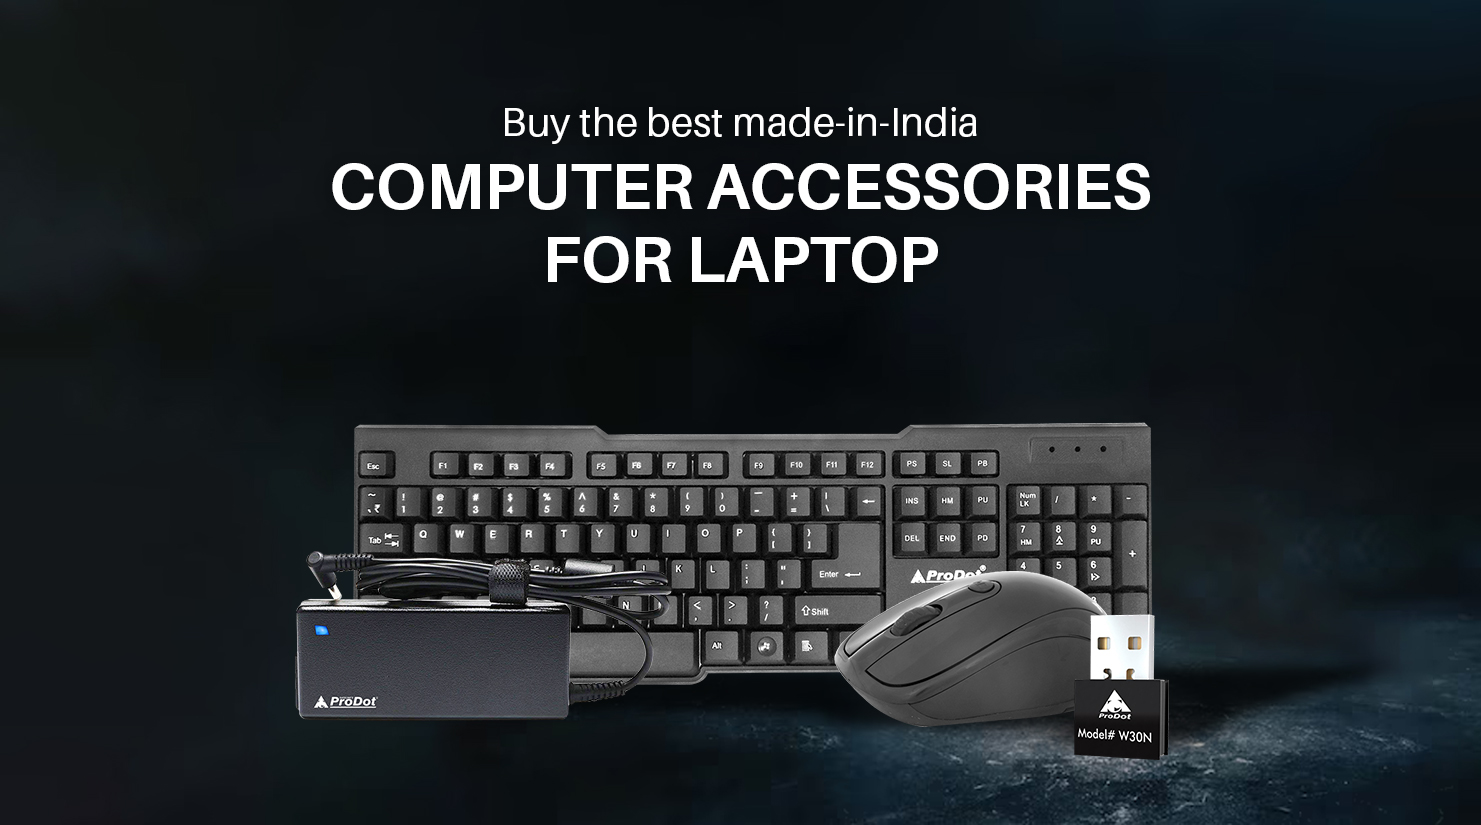 buy the best made in india computer accessories online